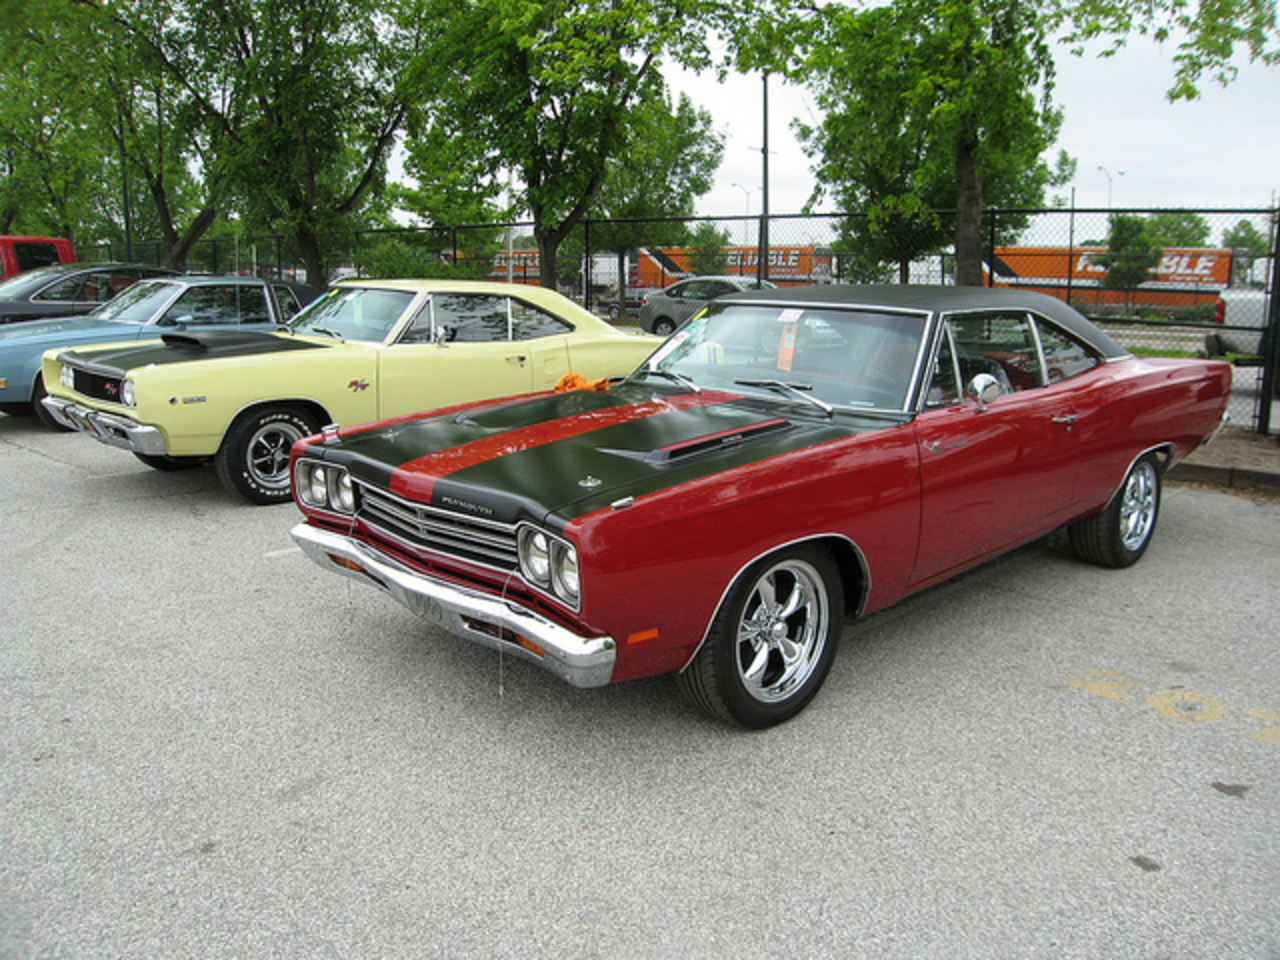 68 Dodge Coronet RT and 69 Plymouth Road Runner | Flickr - Photo ...